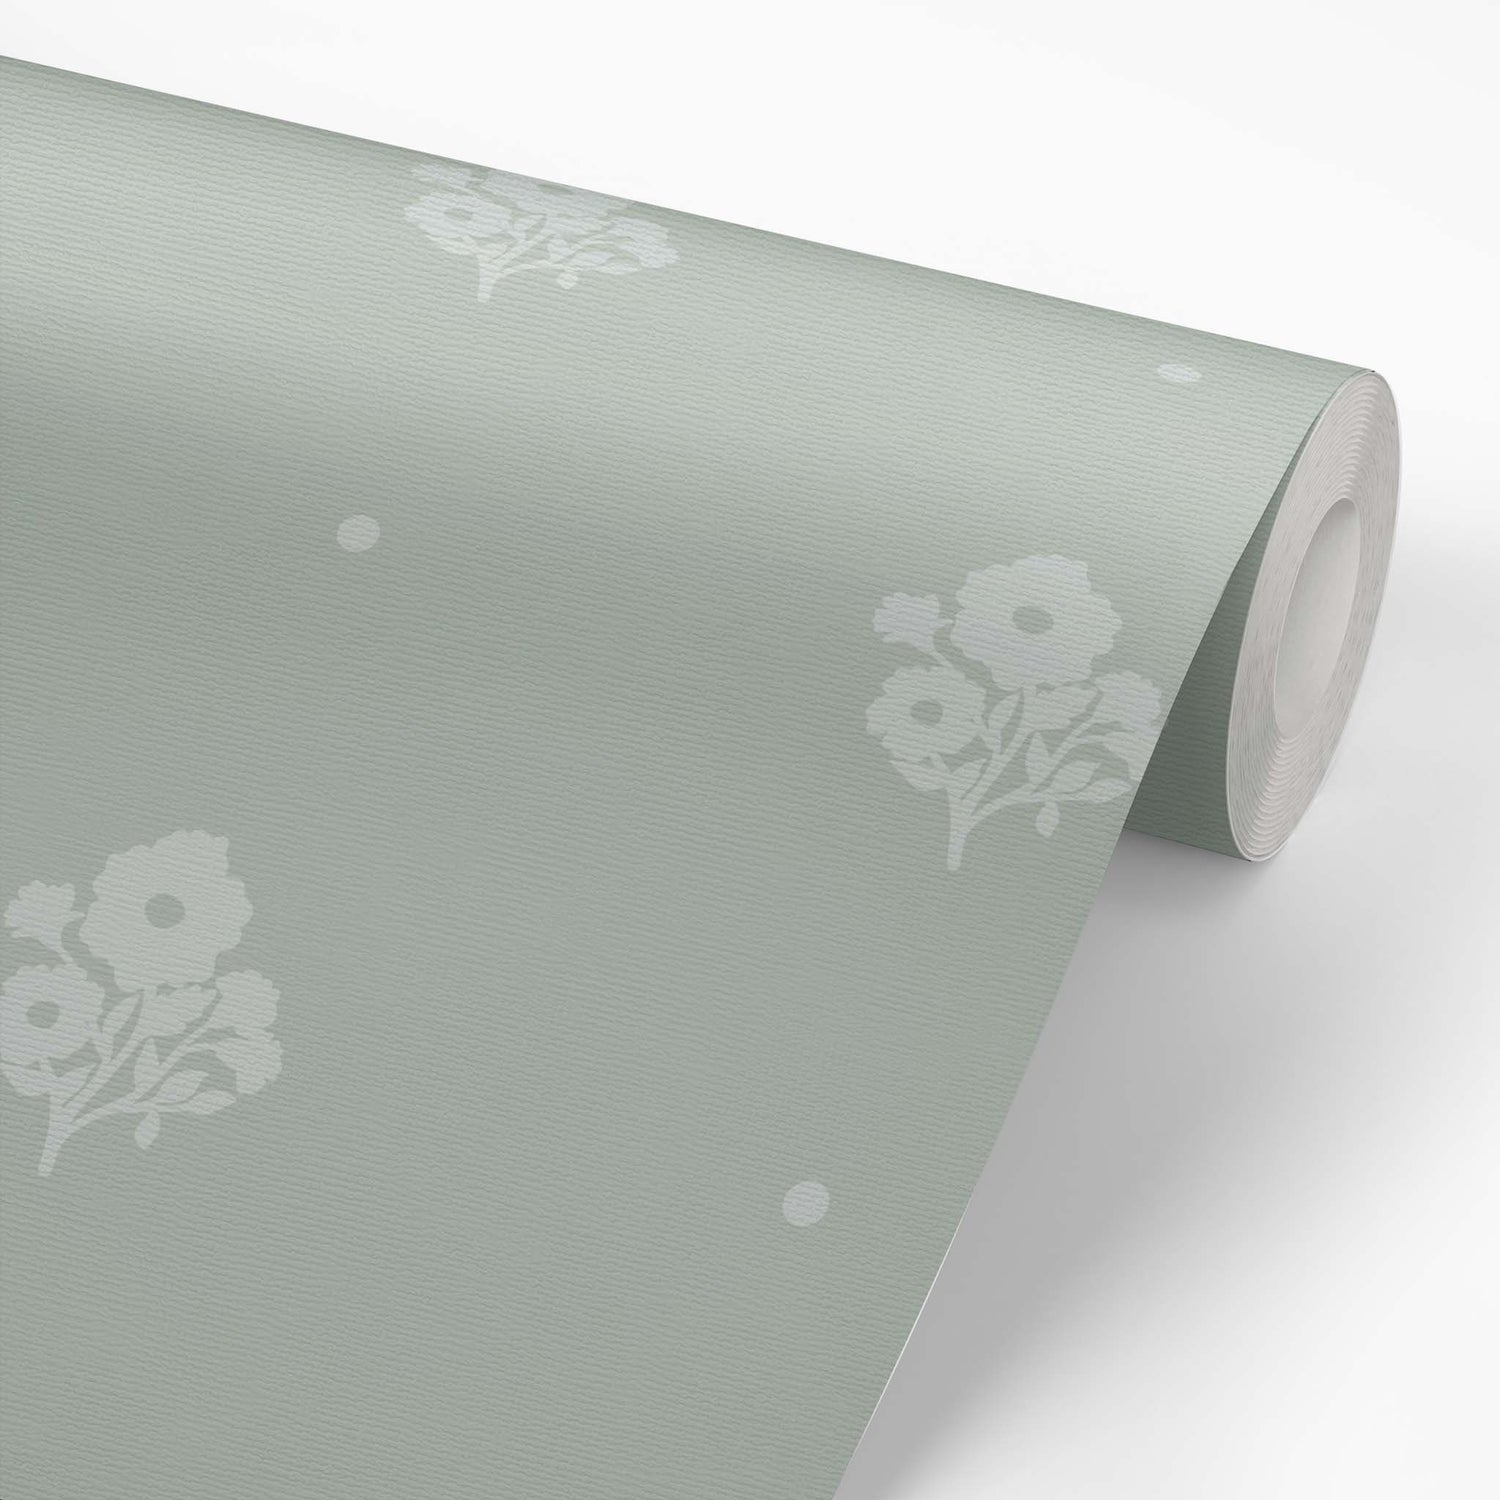 Elevate your home decor with our Cambridge Wallpaper in a sophisticated green hue shown on a wallpaper roll.